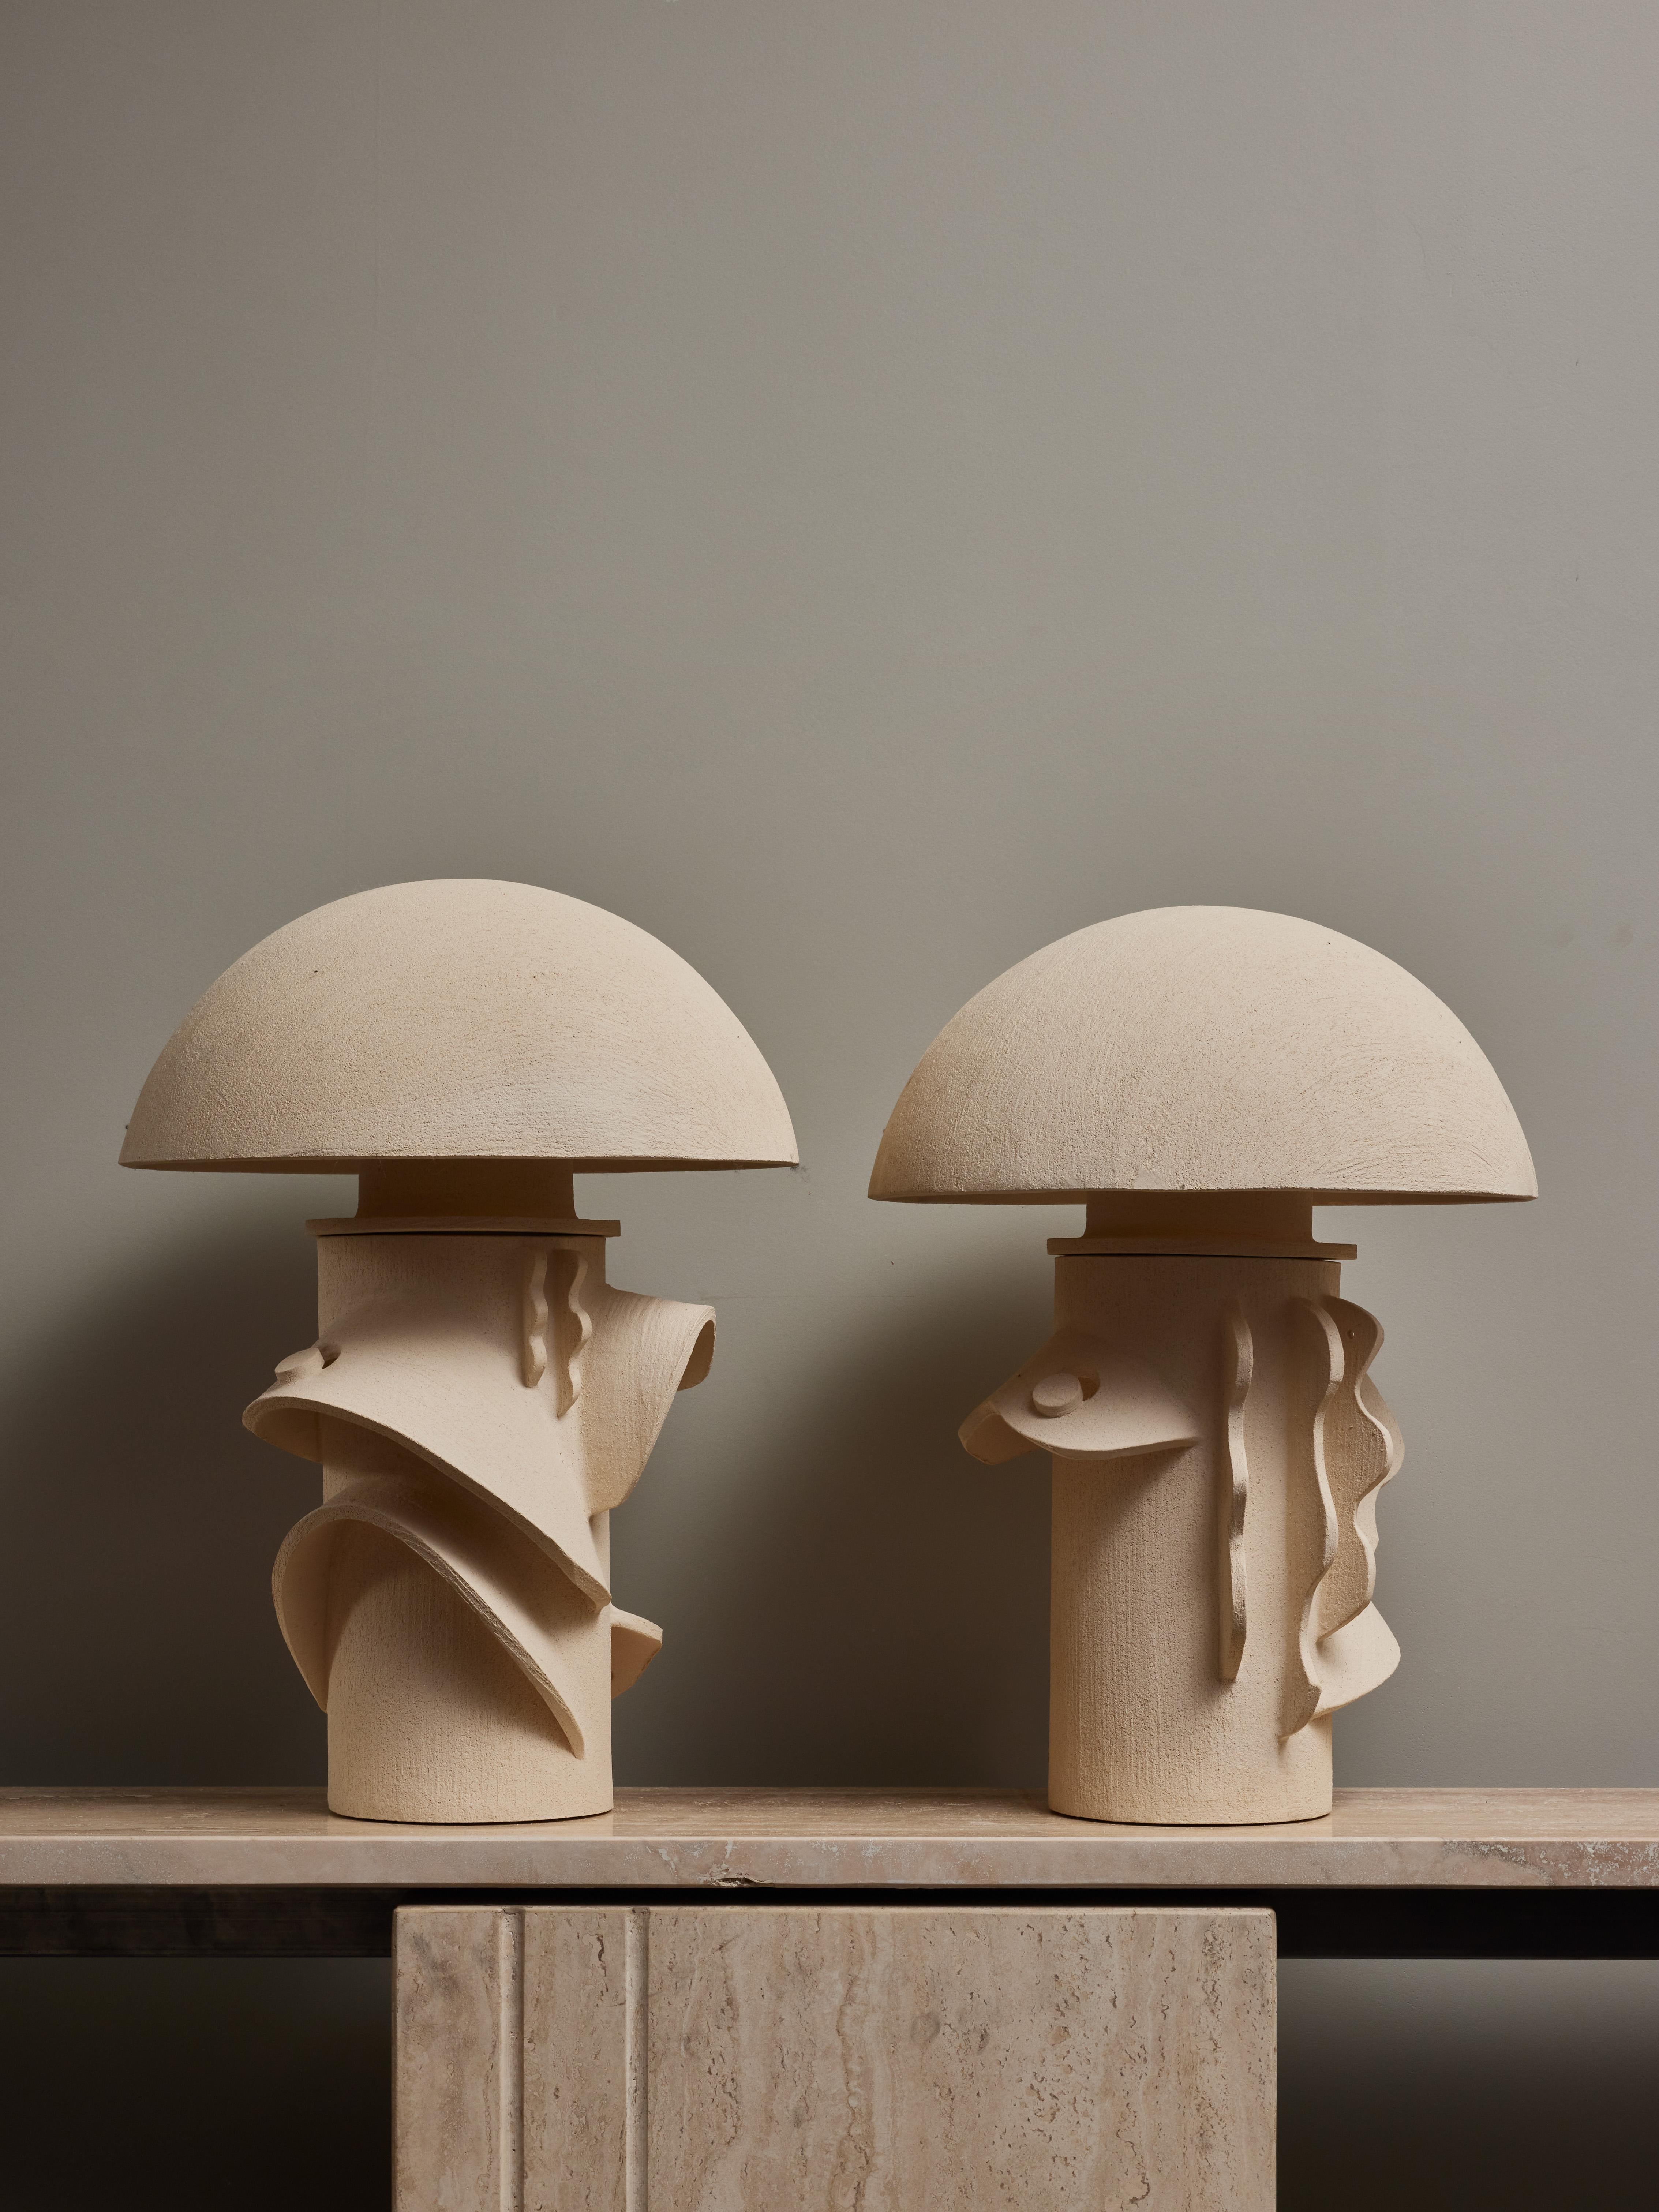 Pair of table lamps made by Olivia Cognet. Each piece is made of a large cylindrical body covered with sculpted decors and topped with a curved ceramic lampshade.

Since moving to Los Angeles in 2016, French artist and designer Olivia Cognet has